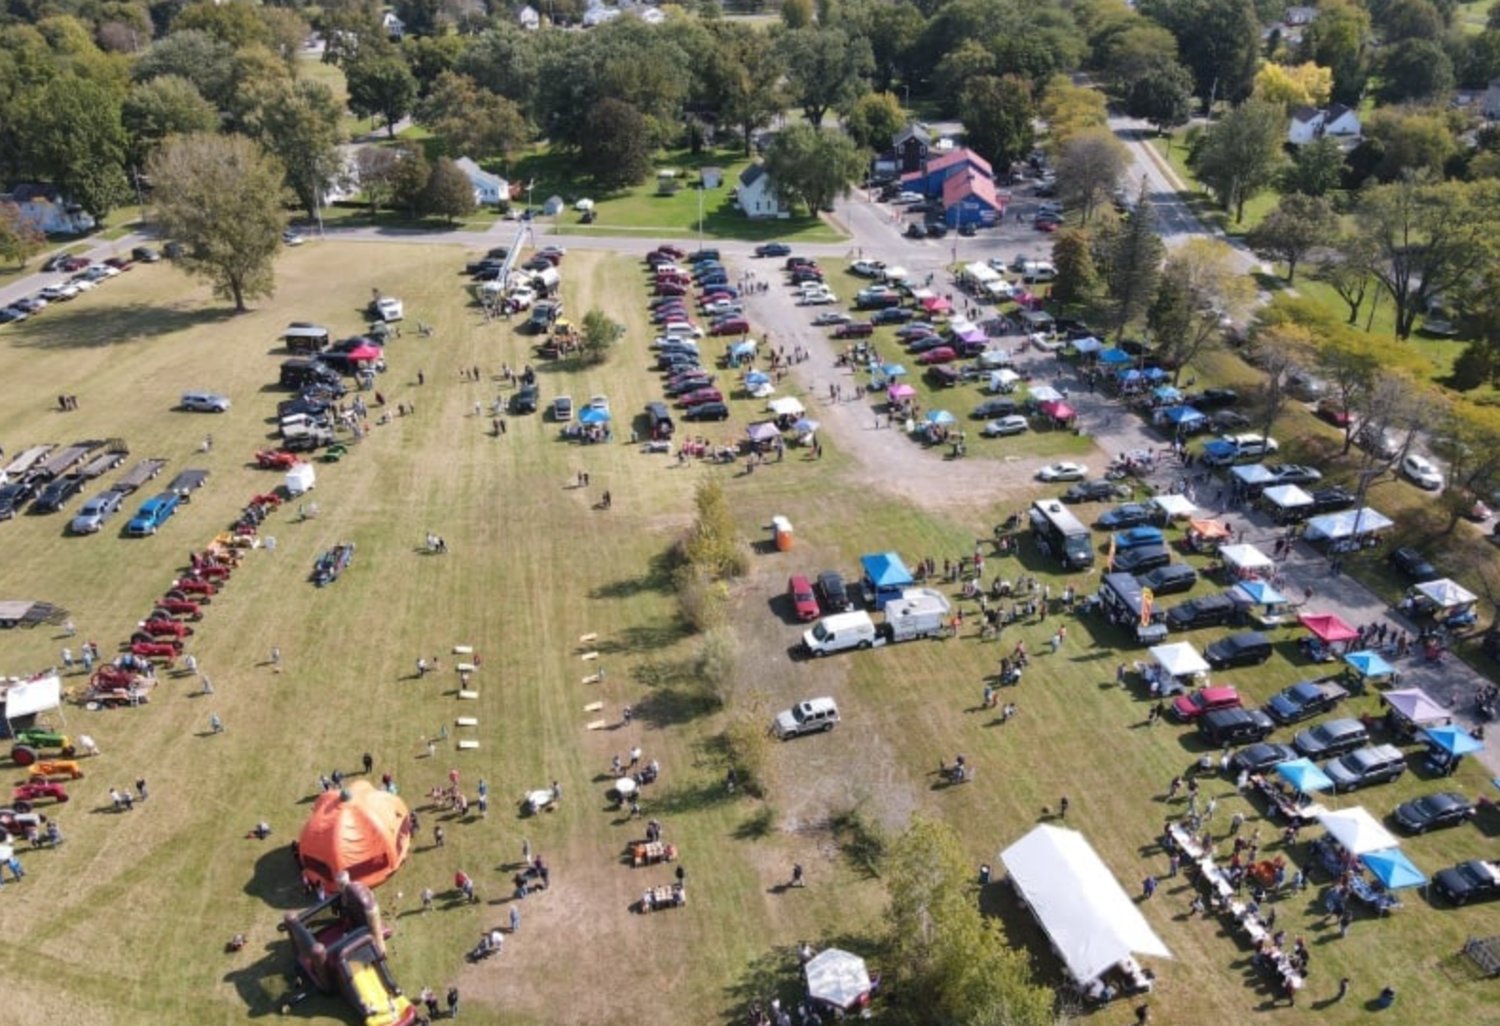 This overhead shot shows the first annual Oneida Fall Fest located at 223 Mott Street, Oneida. The second Fall Fest will take place in the same location on October 1, 2022.